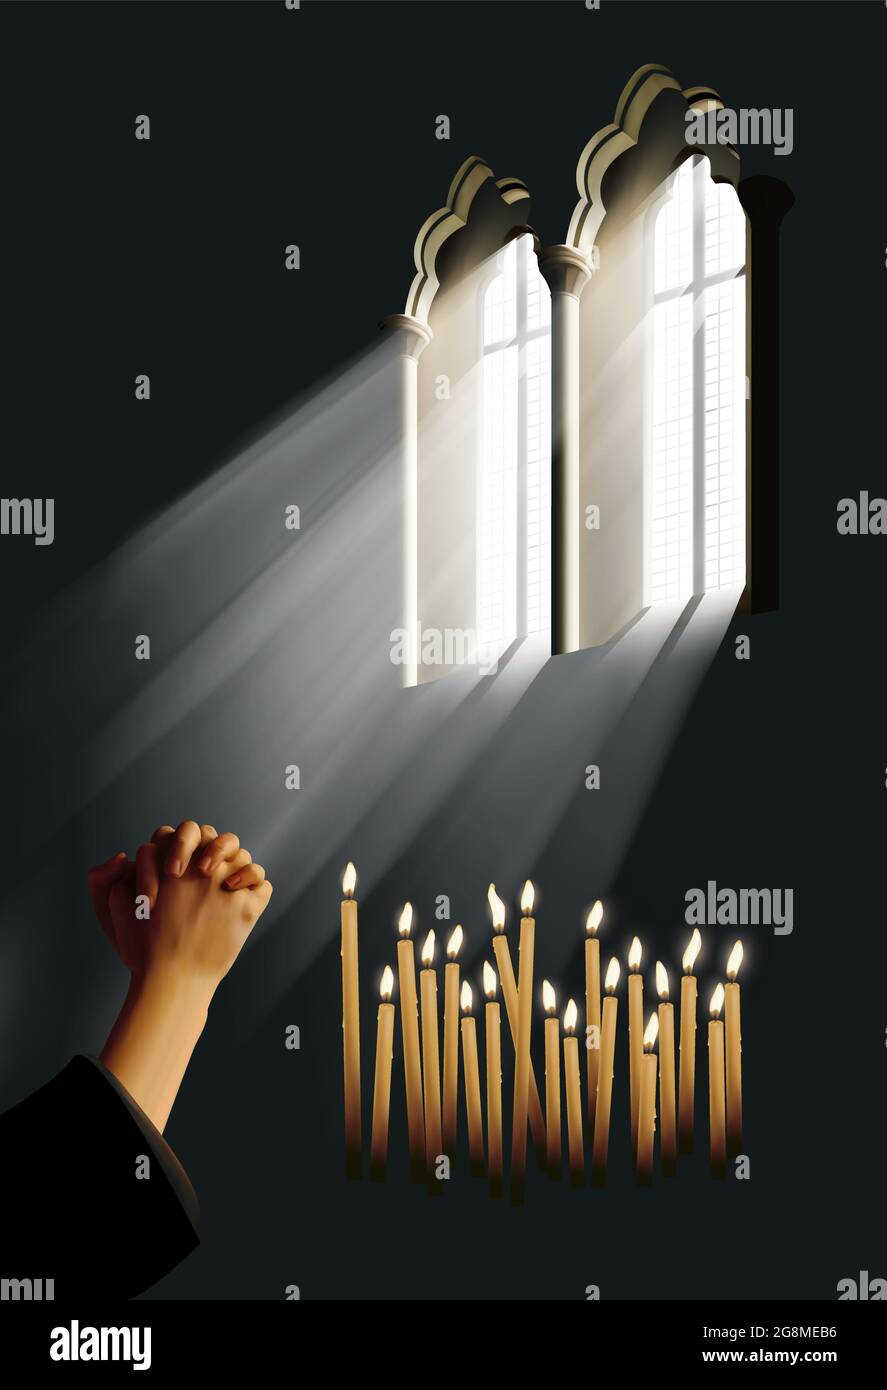 Realistic vector illustration of hands clasped in prayer with lit candles below light streaming through church windows Stock Vector